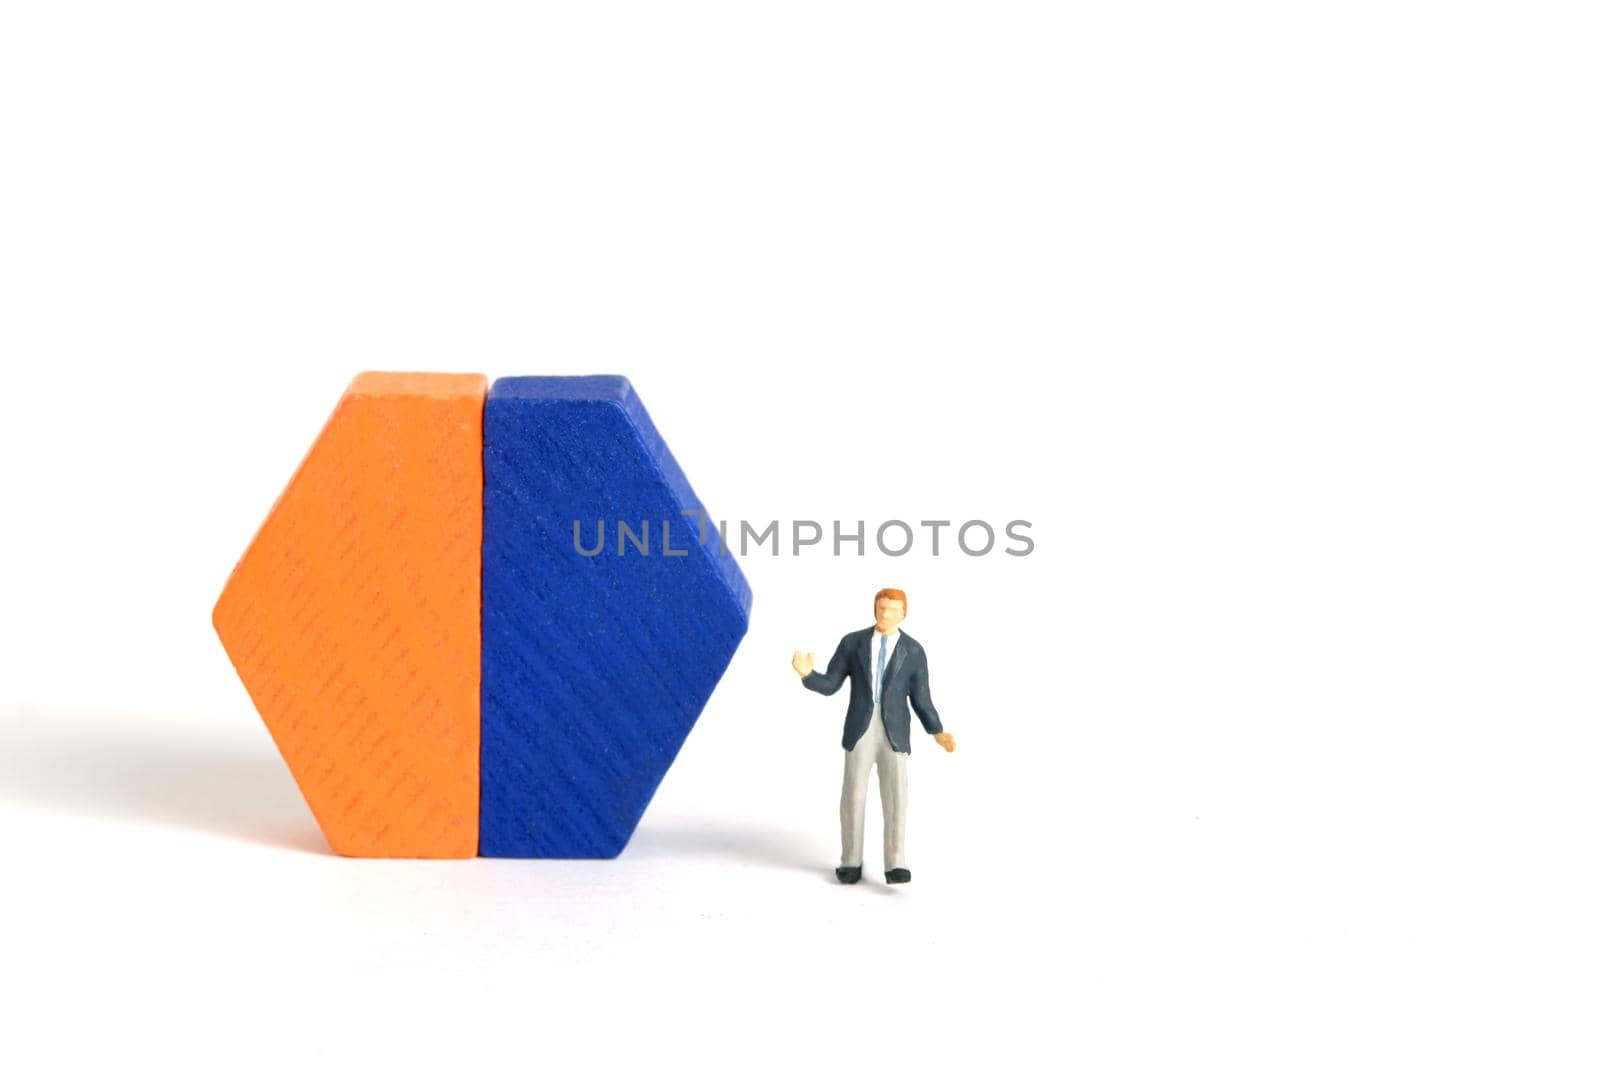 Miniature people toy figure photography. A shrugging businessman doing business presentation standing in front of wooden chart diagram. Isolated on white background. Image photo